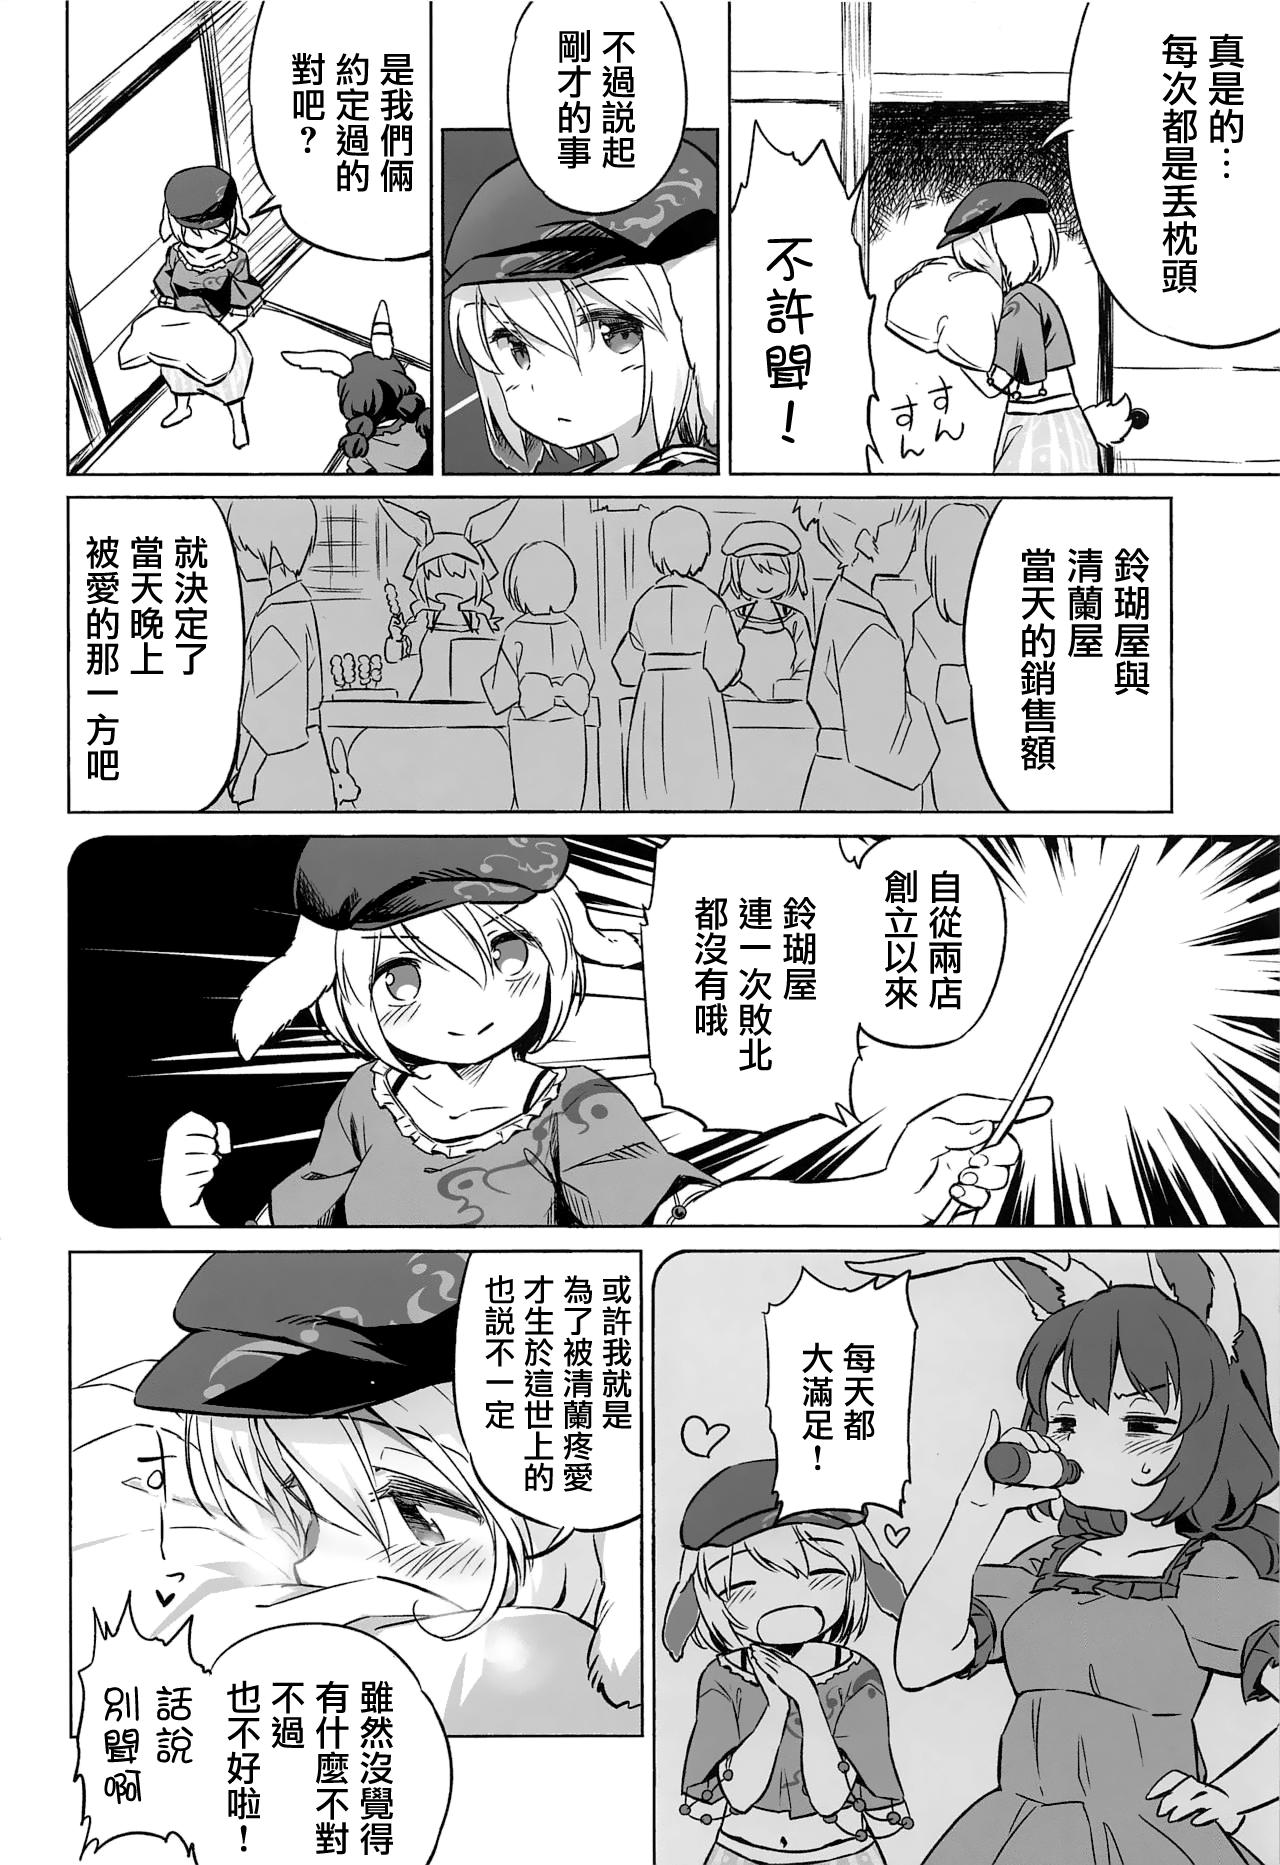 Chica Granny Smith Mating - Touhou project Pene - Page 7